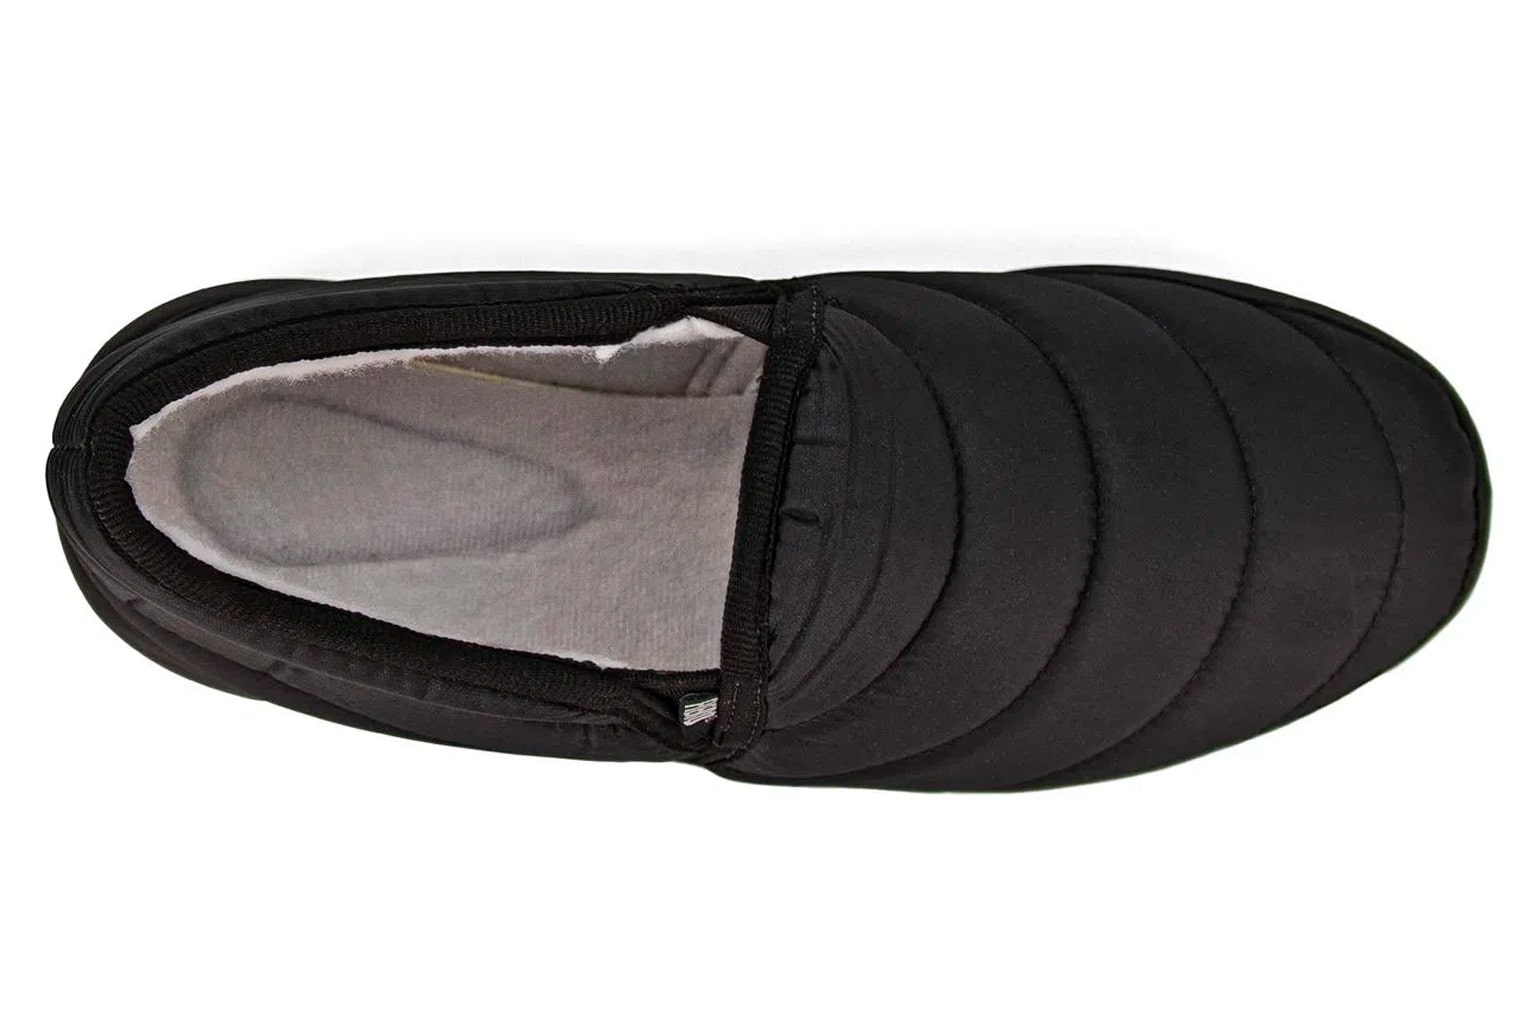 Pantufas com forro Thermal Warm Protection